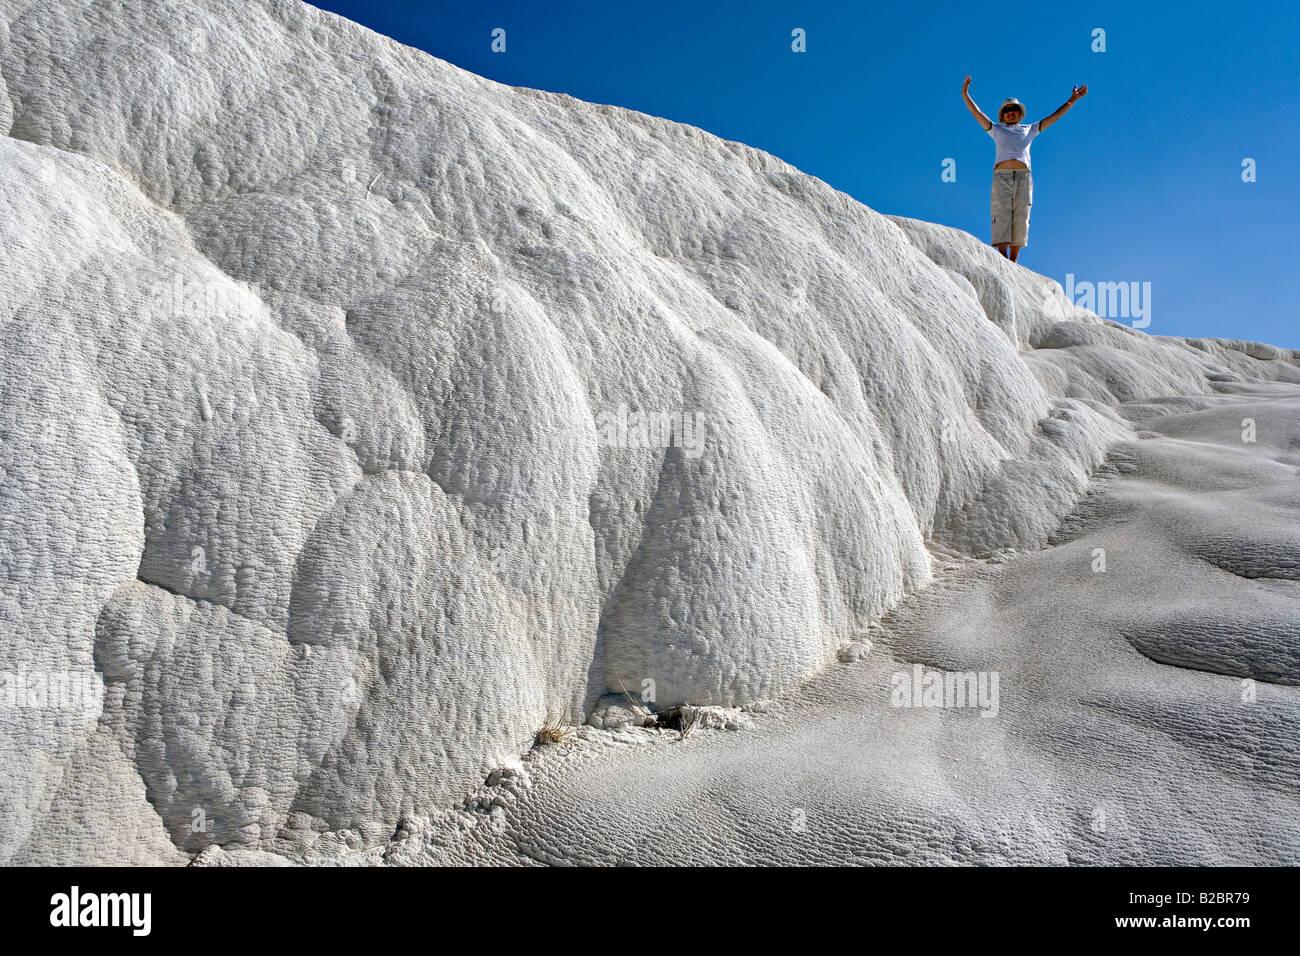 Boy standing on calcite terraces and sulphuric water pools at Pamukalle Turkey Stock Photo